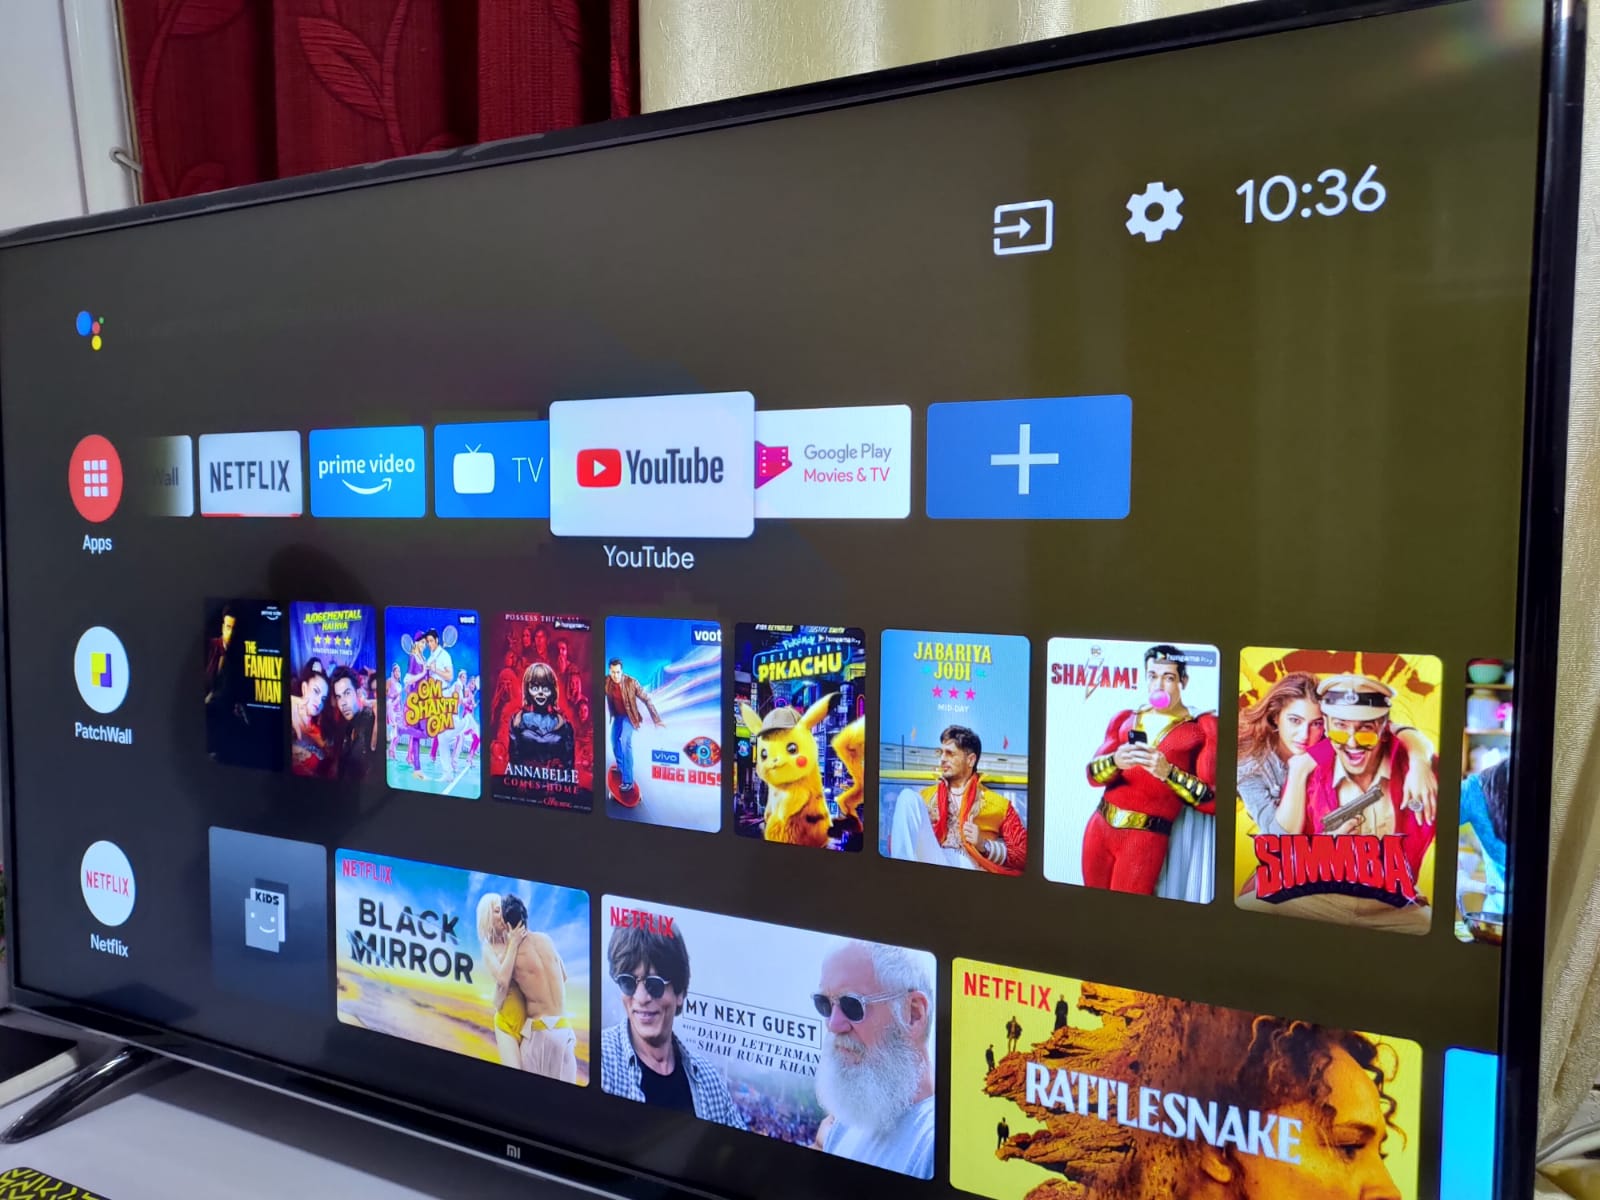 How To Play Youtube In Led Tv Clearance Deals, Save 45 jlcatj.gob.mx